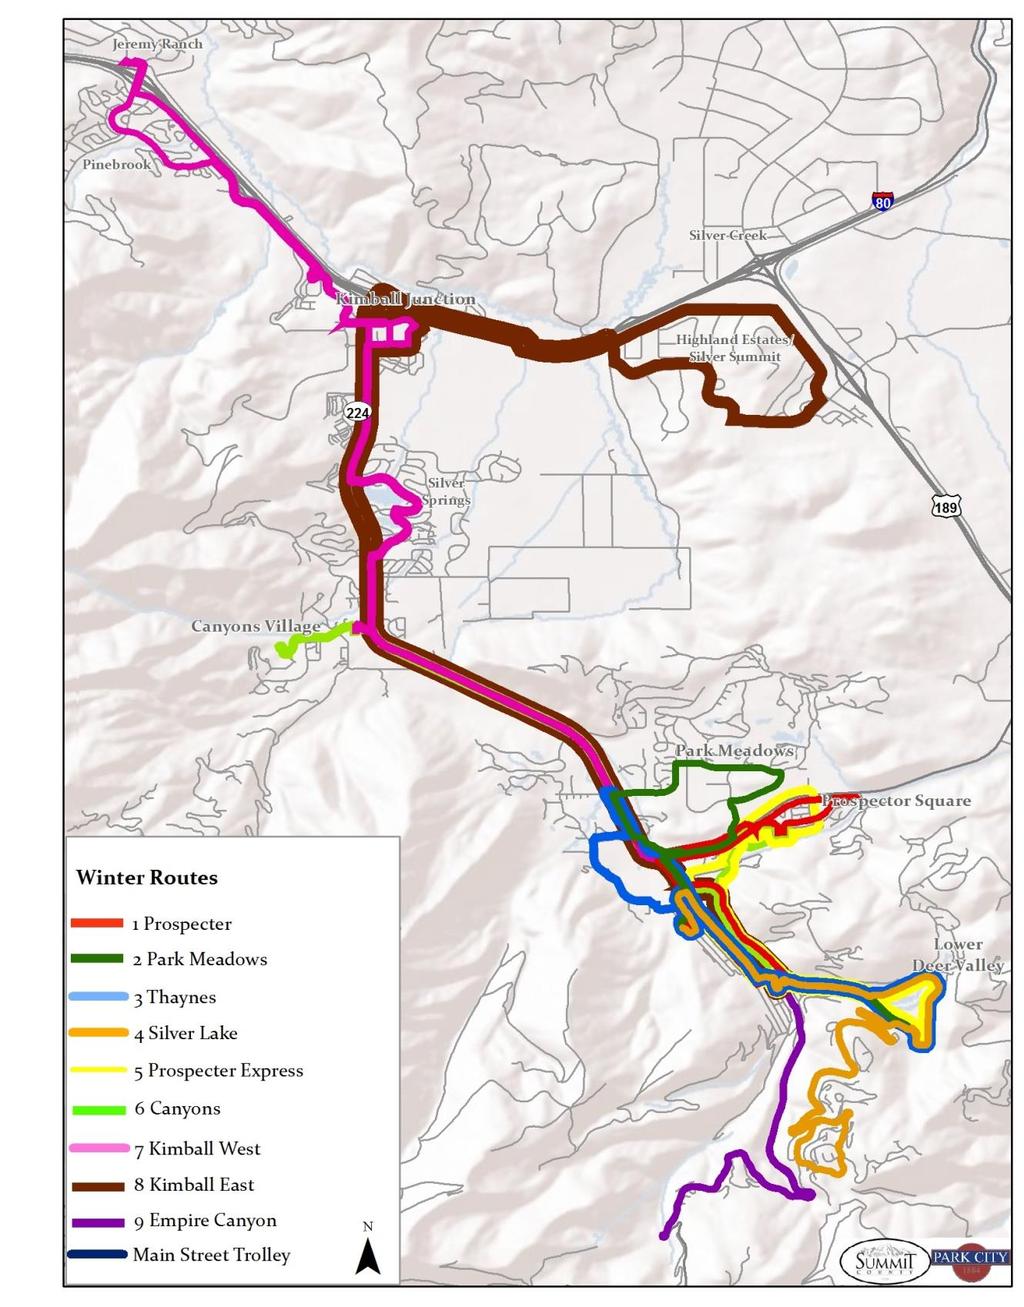 Review of Existing Transit Services Figure 3-3: Park